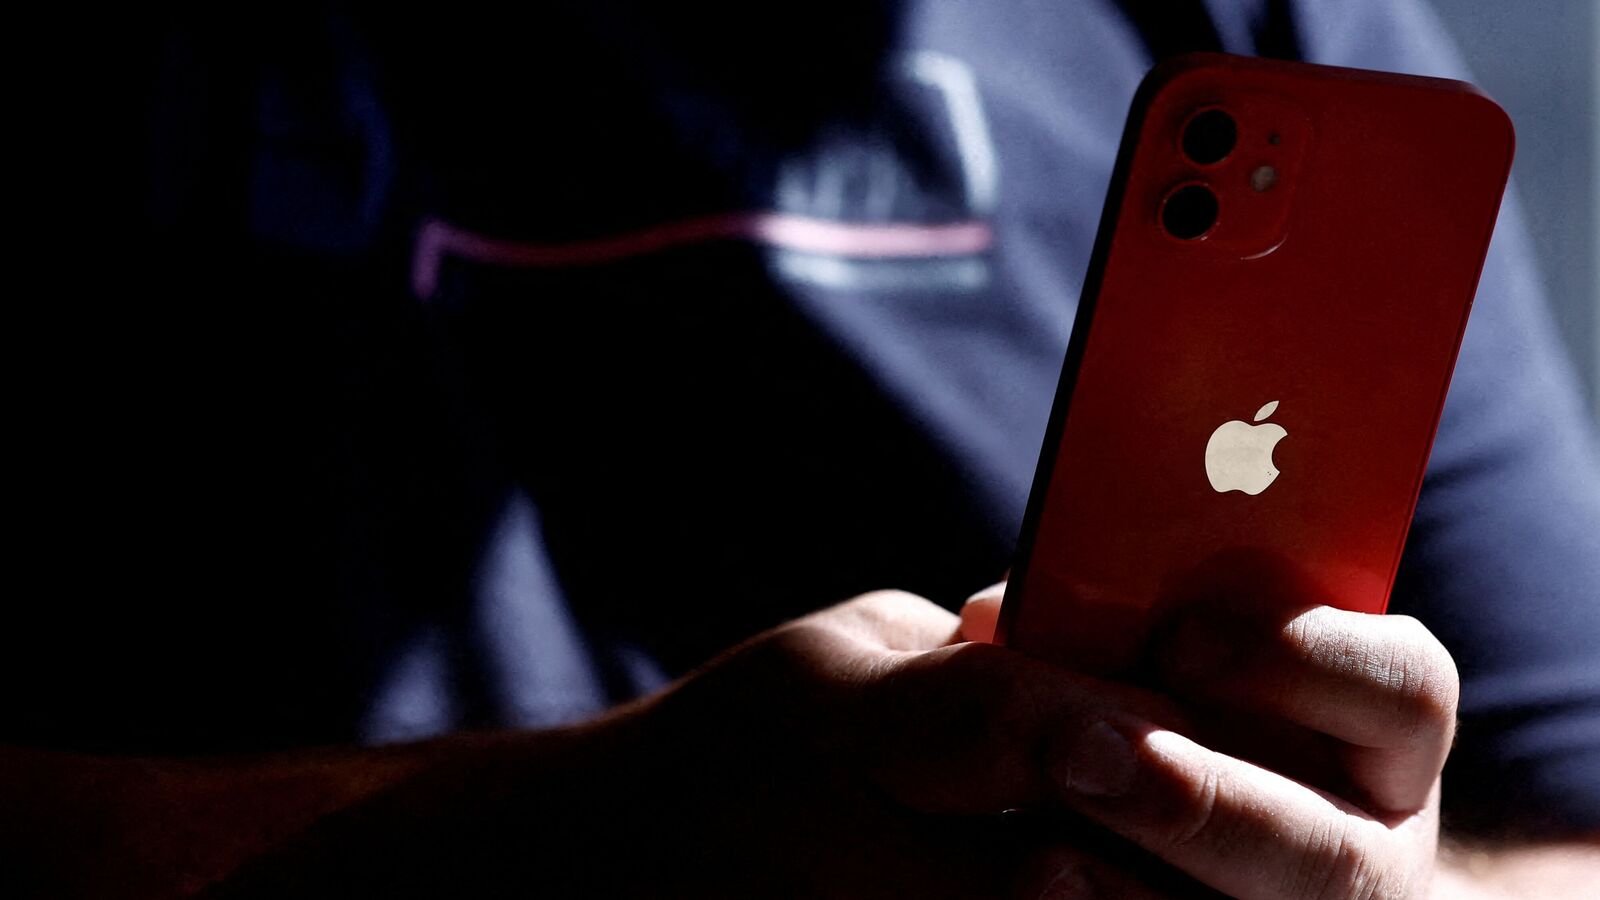 iPhone users beware! Reports uncover data spying through in-app ads and push notifications